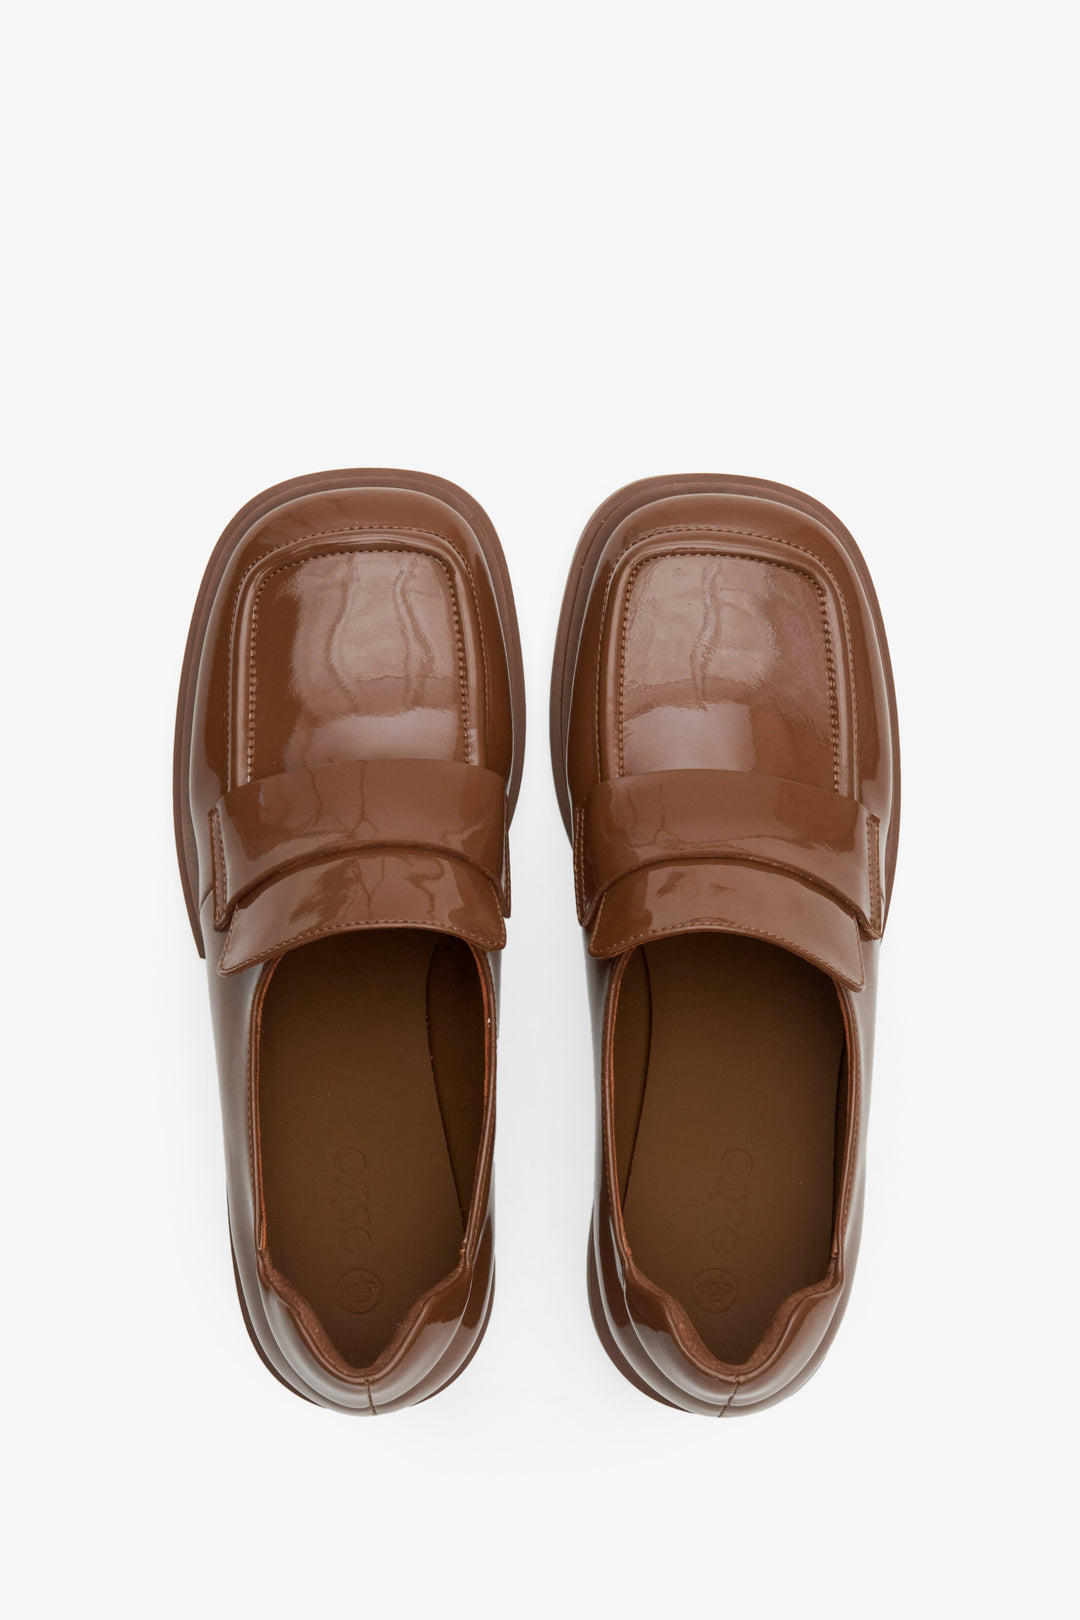 Women's leather, patent leather moccasins in brown by Estro - top view presentation of the model.